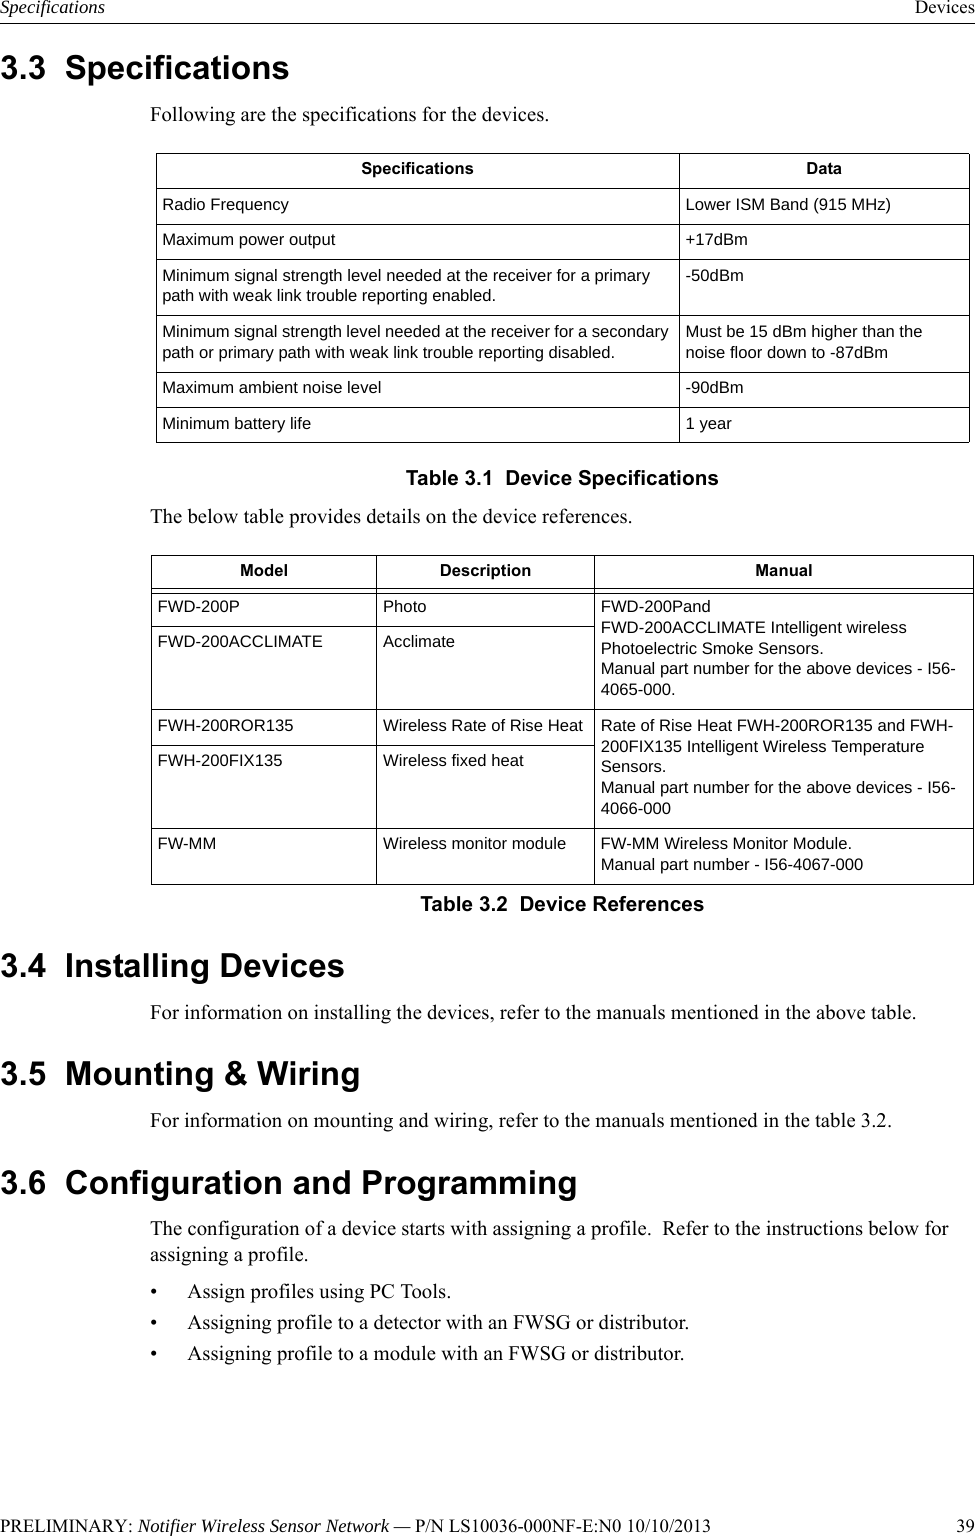 PRELIMINARY: Notifier Wireless Sensor Network — P/N LS10036-000NF-E:N0 10/10/2013   39Specifications Devices3.3  SpecificationsFollowing are the specifications for the devices.Table 3.1  Device SpecificationsThe below table provides details on the device references.3.4  Installing DevicesFor information on installing the devices, refer to the manuals mentioned in the above table.3.5  Mounting &amp; WiringFor information on mounting and wiring, refer to the manuals mentioned in the table 3.2.3.6  Configuration and ProgrammingThe configuration of a device starts with assigning a profile.  Refer to the instructions below for assigning a profile. • Assign profiles using PC Tools.• Assigning profile to a detector with an FWSG or distributor.• Assigning profile to a module with an FWSG or distributor.Specifications DataRadio Frequency Lower ISM Band (915 MHz)Maximum power output +17dBmMinimum signal strength level needed at the receiver for a primary path with weak link trouble reporting enabled.-50dBmMinimum signal strength level needed at the receiver for a secondary path or primary path with weak link trouble reporting disabled.Must be 15 dBm higher than the noise floor down to -87dBmMaximum ambient noise level -90dBmMinimum battery life 1 yearModel Description ManualFWD-200P Photo FWD-200Pand FWD-200ACCLIMATE Intelligent wireless Photoelectric Smoke Sensors. Manual part number for the above devices - I56-4065-000.FWD-200ACCLIMATE AcclimateFWH-200ROR135 Wireless Rate of Rise Heat Rate of Rise Heat FWH-200ROR135 and FWH-200FIX135 Intelligent Wireless Temperature Sensors.Manual part number for the above devices - I56-4066-000FWH-200FIX135 Wireless fixed heatFW-MM Wireless monitor module FW-MM Wireless Monitor Module.Manual part number - I56-4067-000Table 3.2  Device References